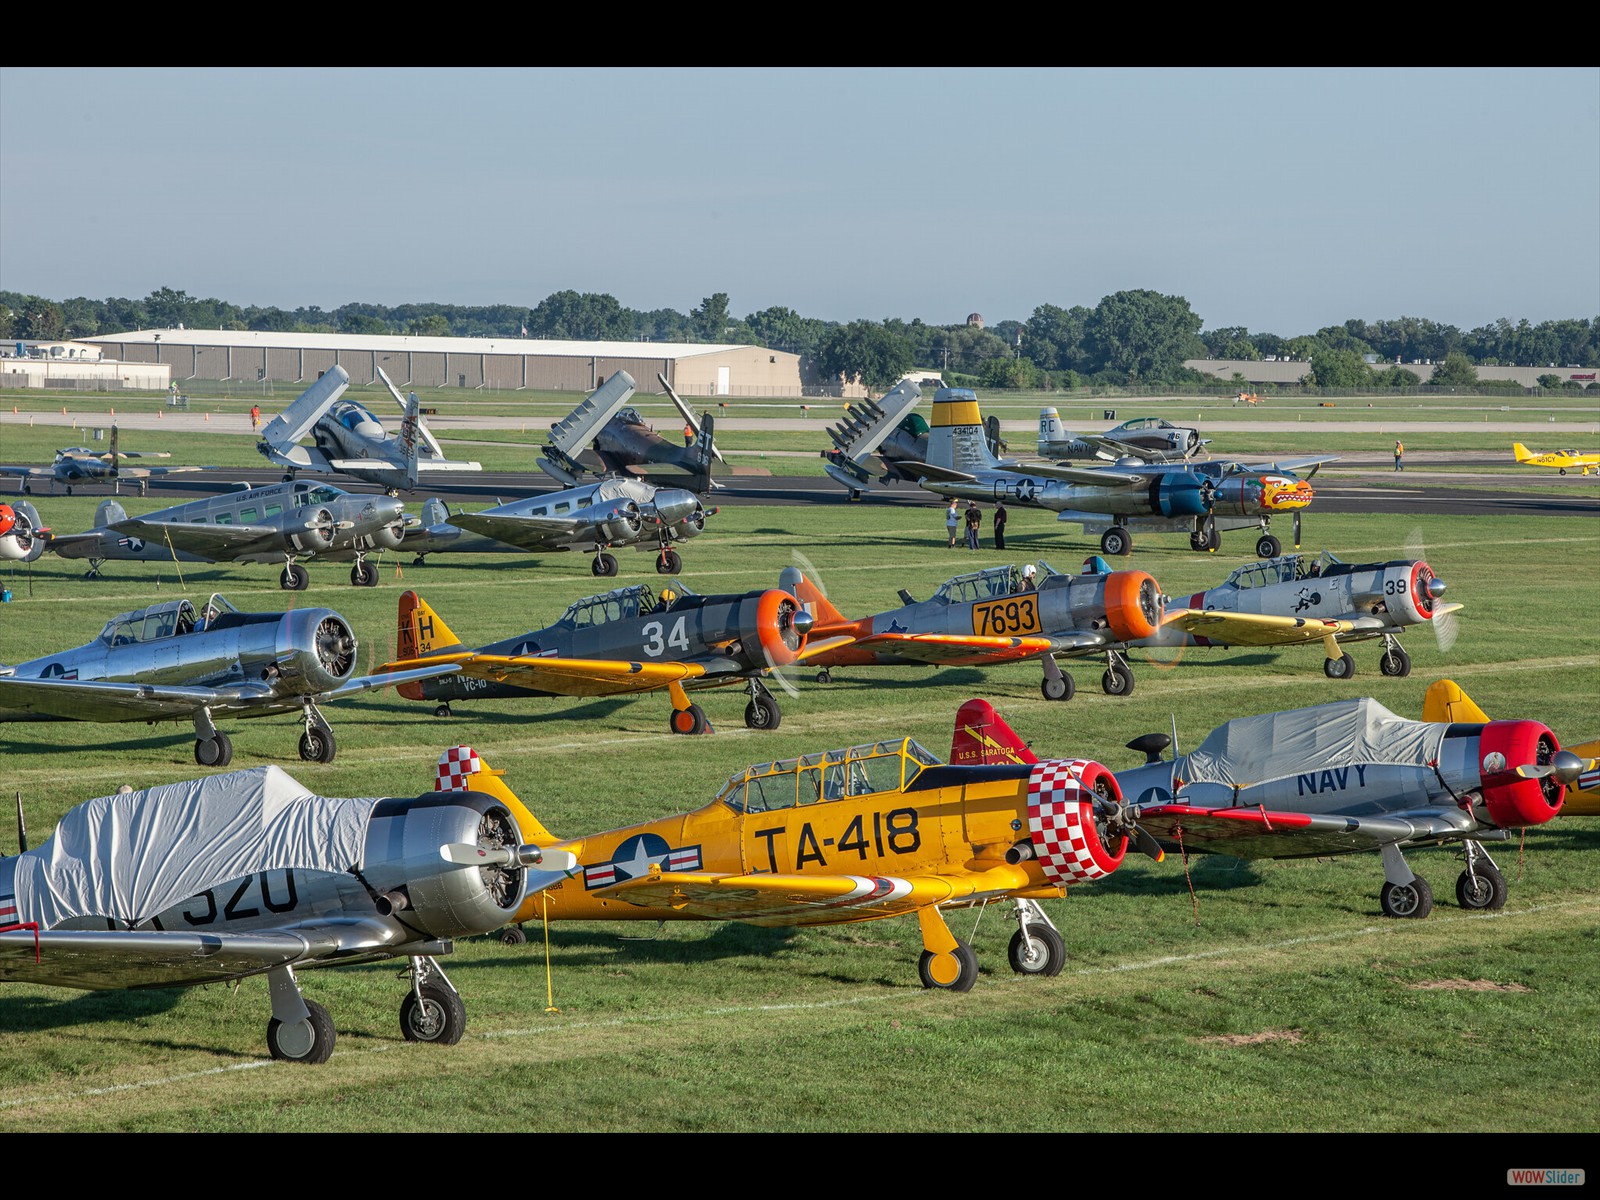 Warbirds at the EAA Airventure in Oshkosh